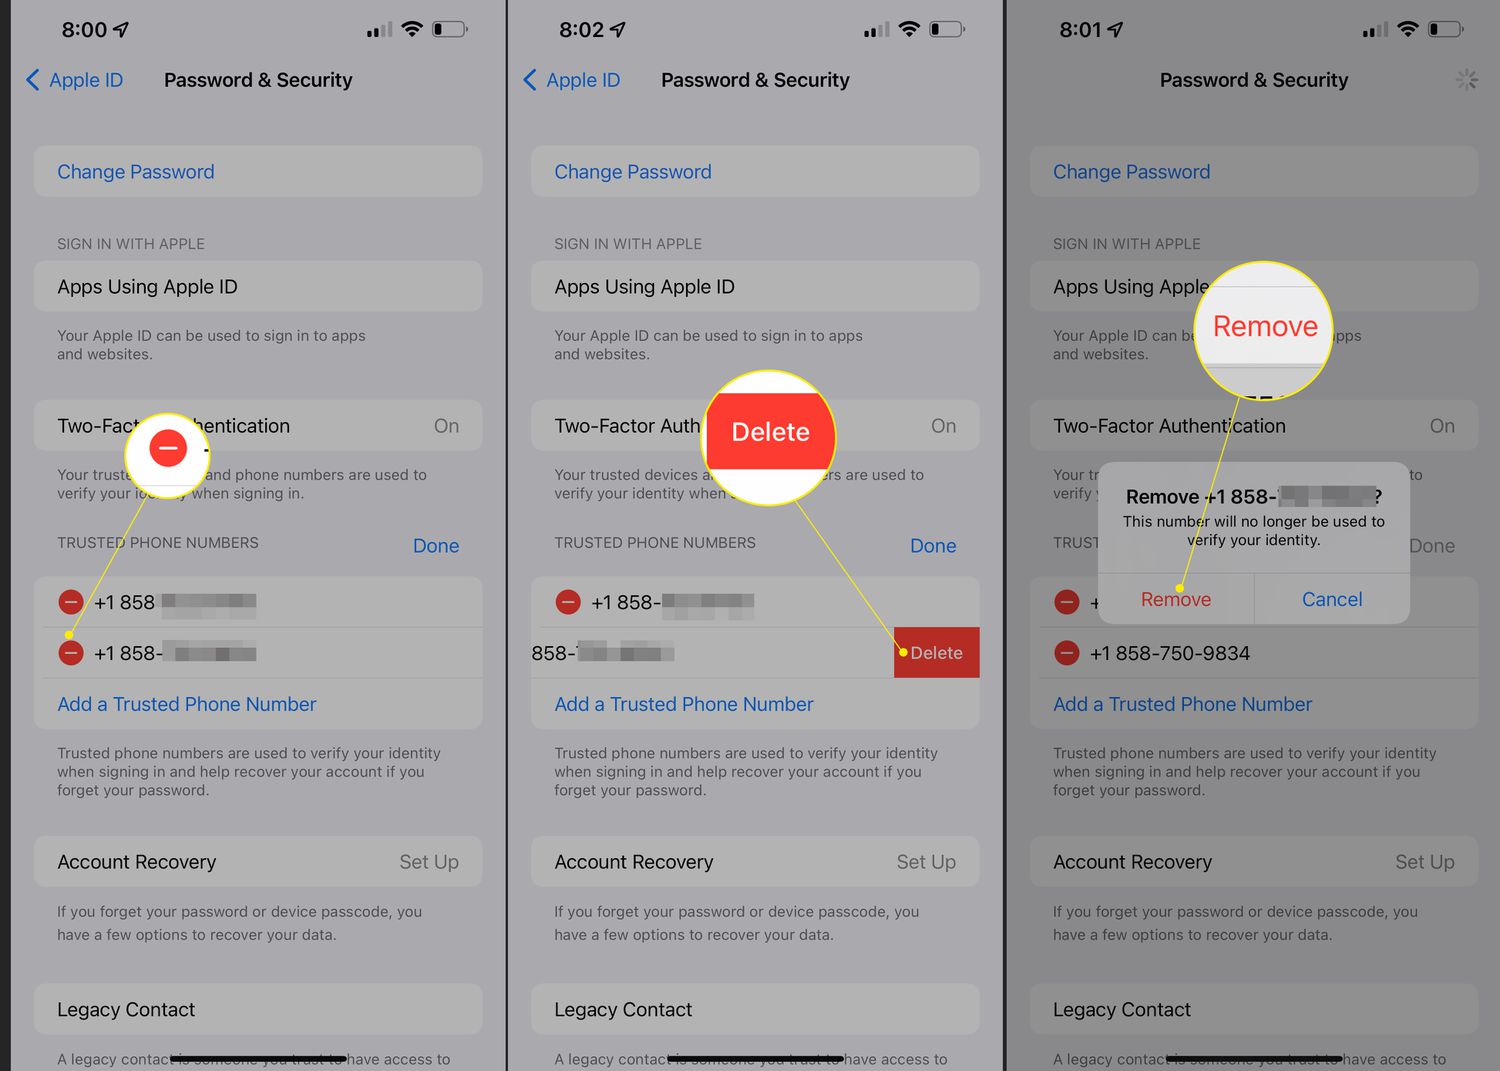 iOS Password & Security settings with minus sign, Delete, and Remove highlighted